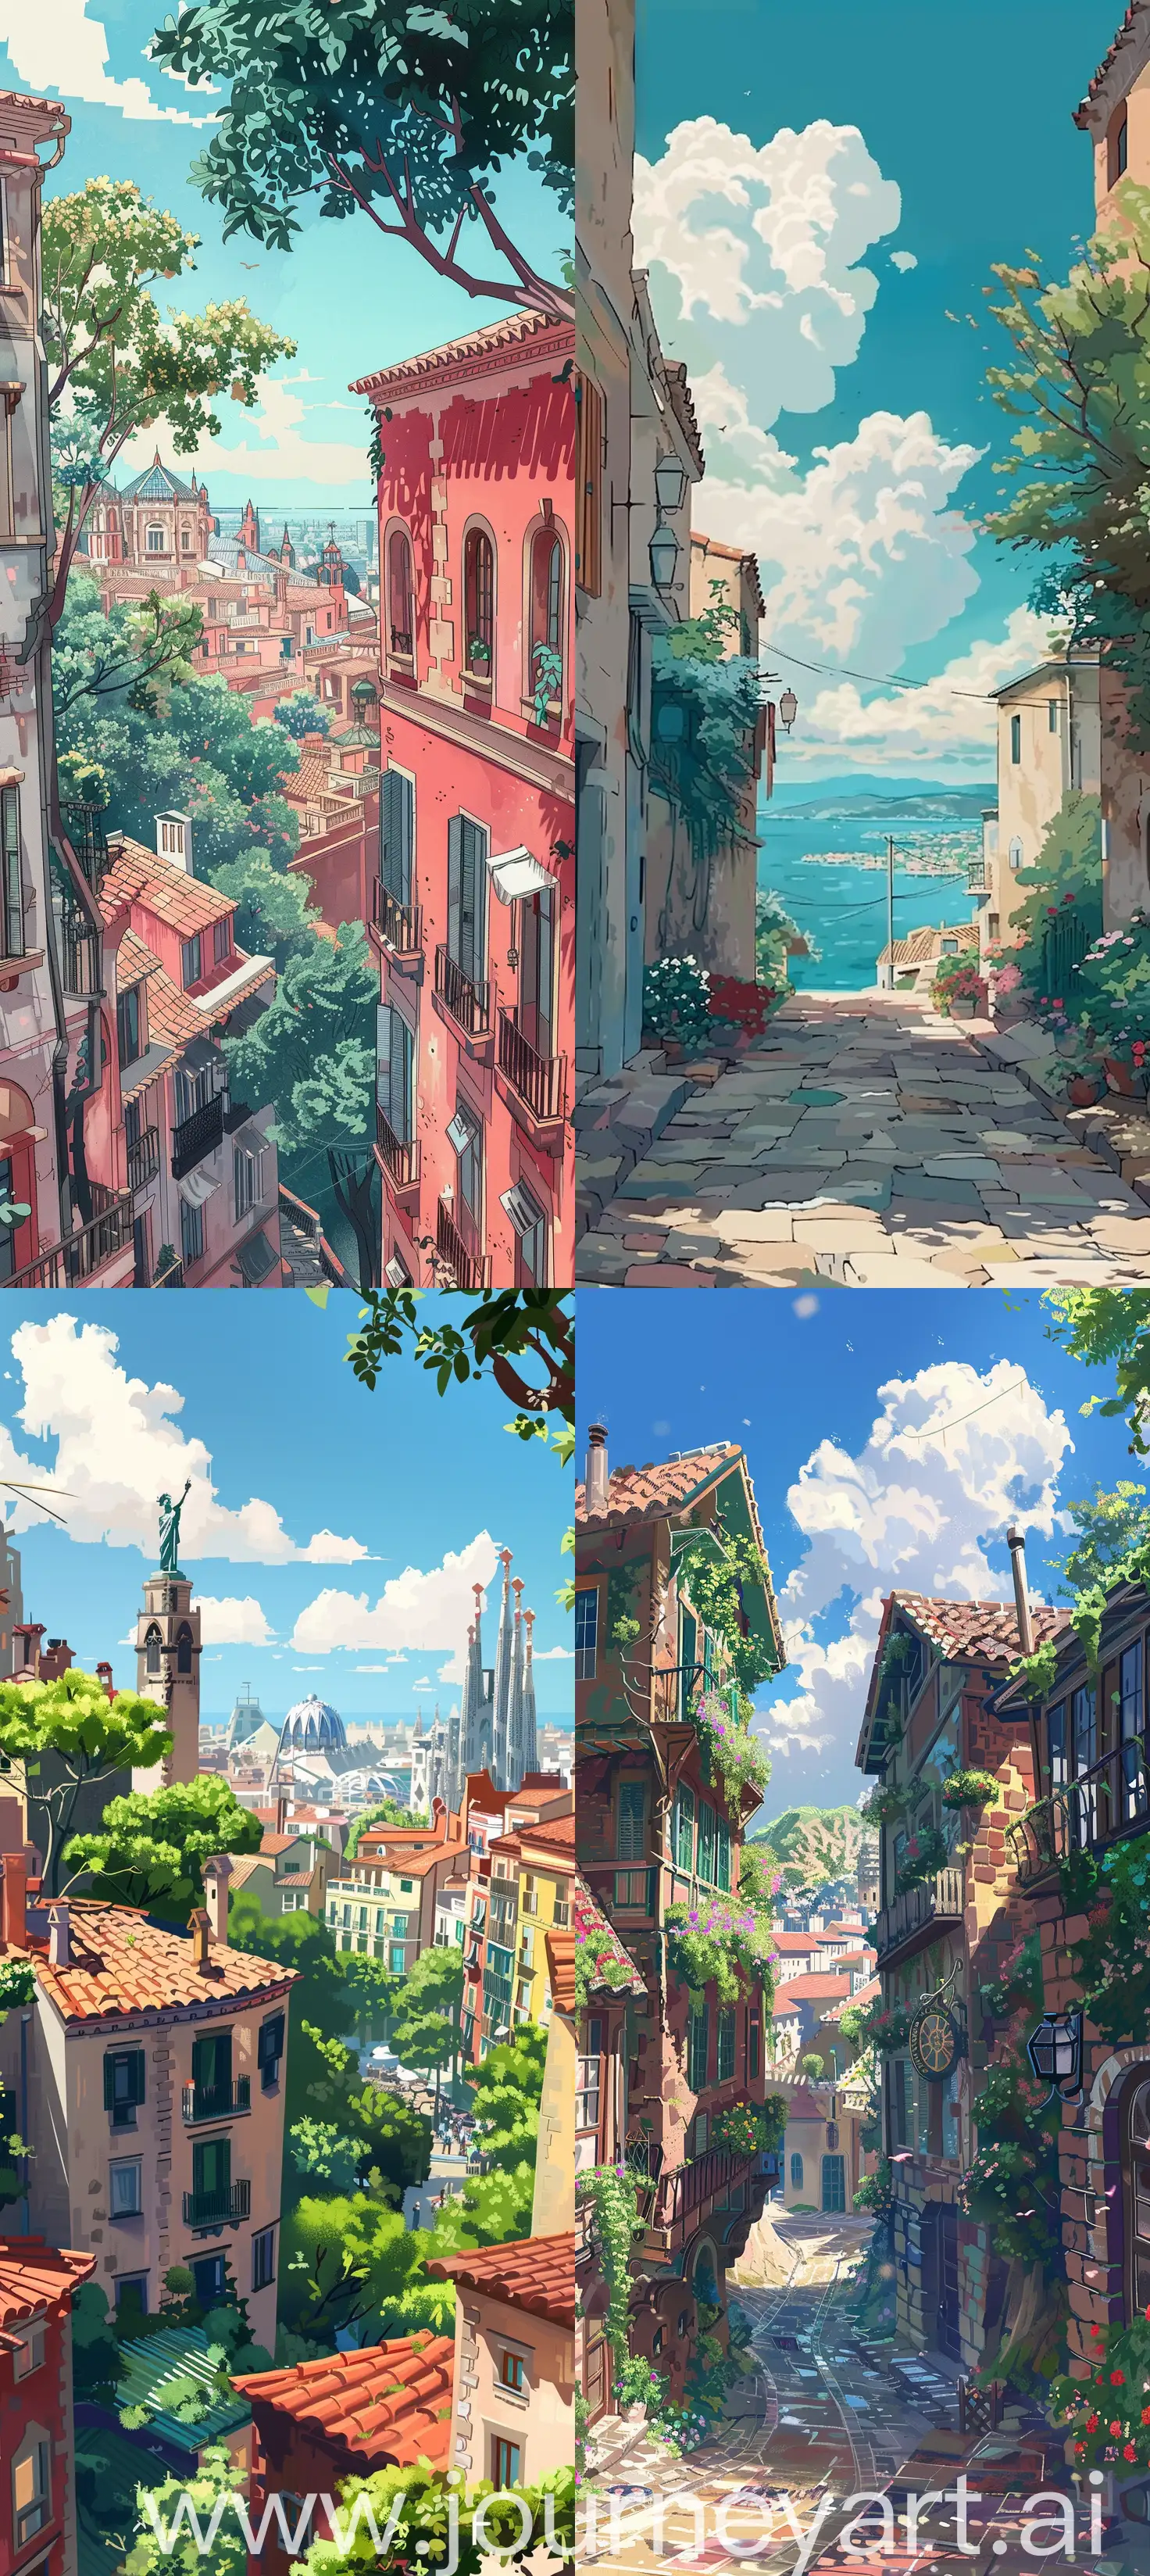 Generate a 4K resolution (400x900) image in the enchanting Studio Ghibli anime style, portraying quintessential landscape of barcelona. Capture the essence of adventure and wonder of this scenic landscape. Emphasize the Studio Ghibli aesthetic with soft colors:: illustration --ar 4:9 --style raw --v 6